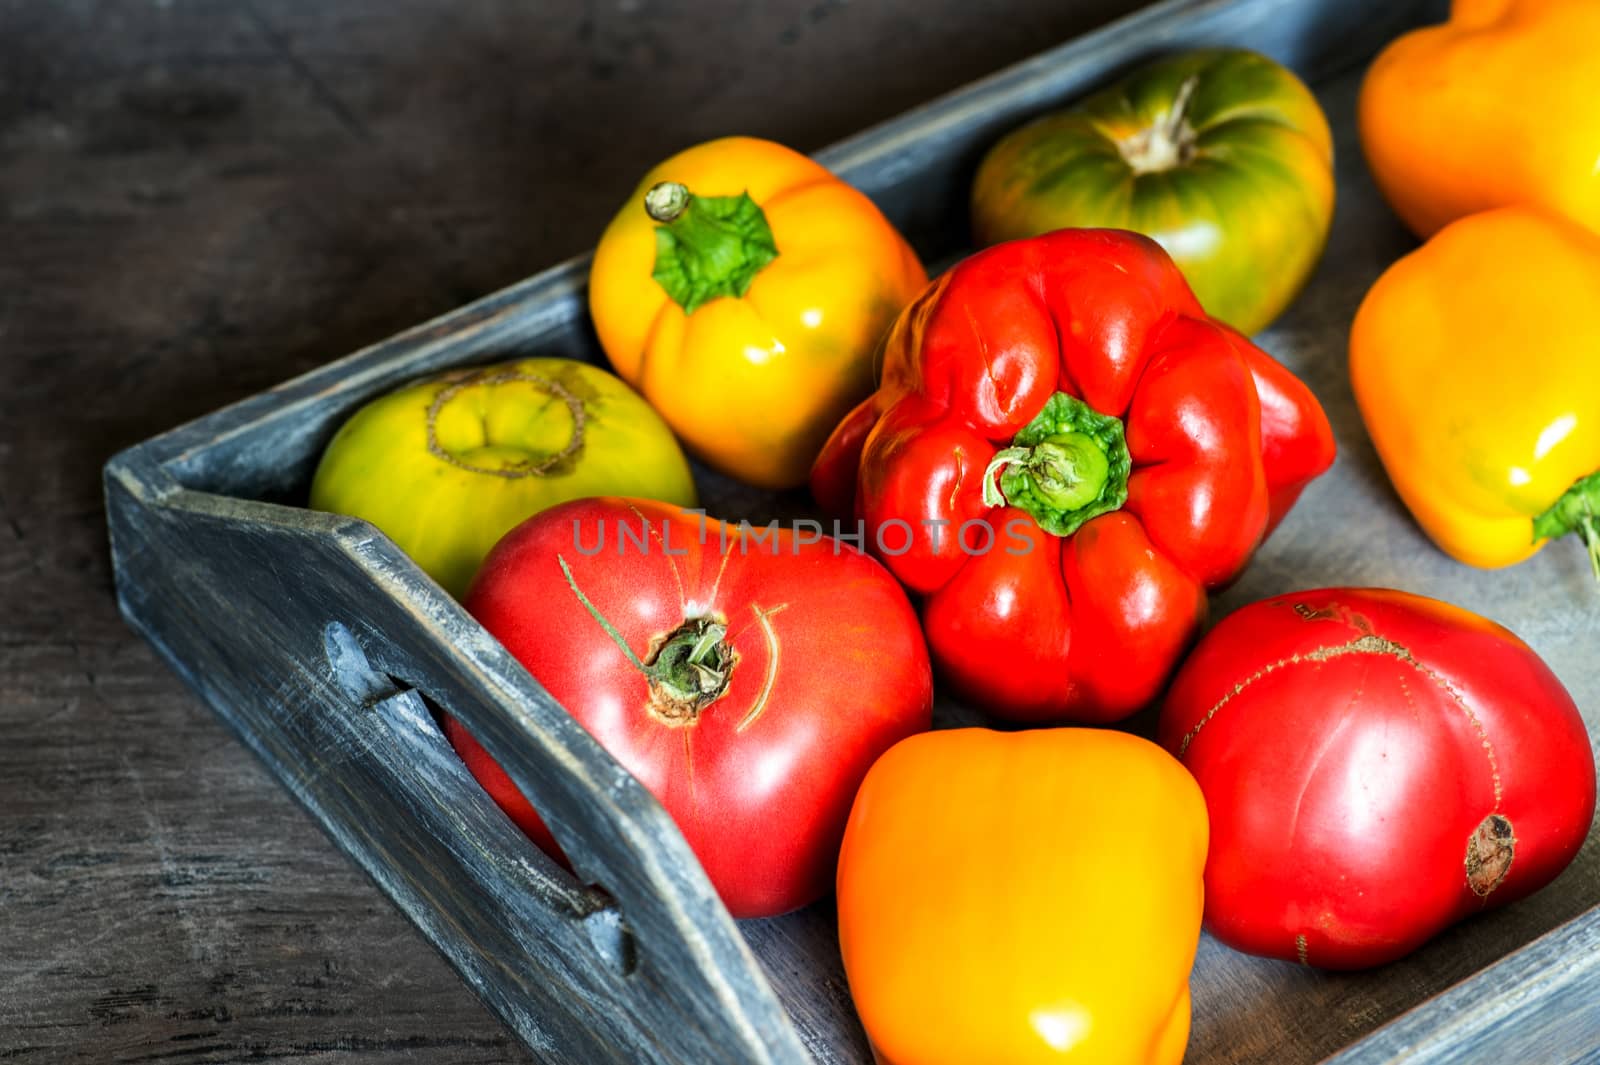 Imperfect natural peppers and tomatoes on an old wooden tray on a dark background. Healthy eating concept